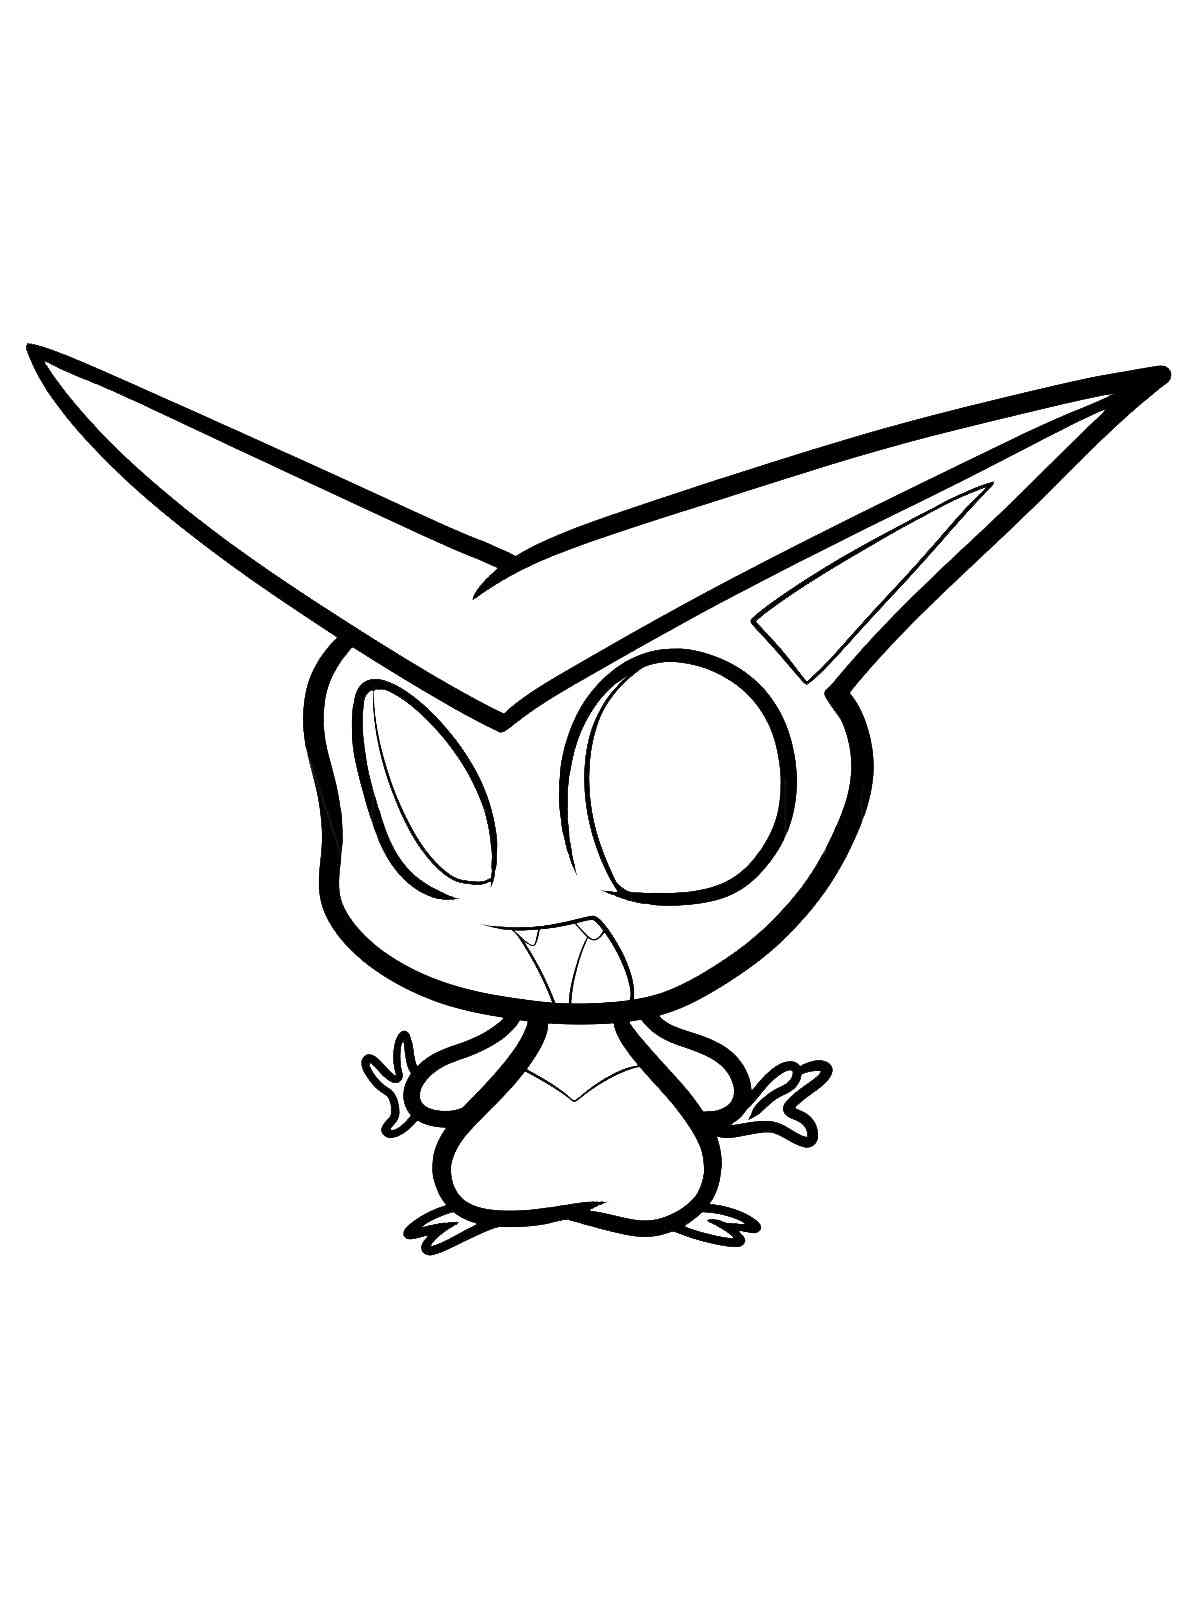 Victini pokemon coloring pages